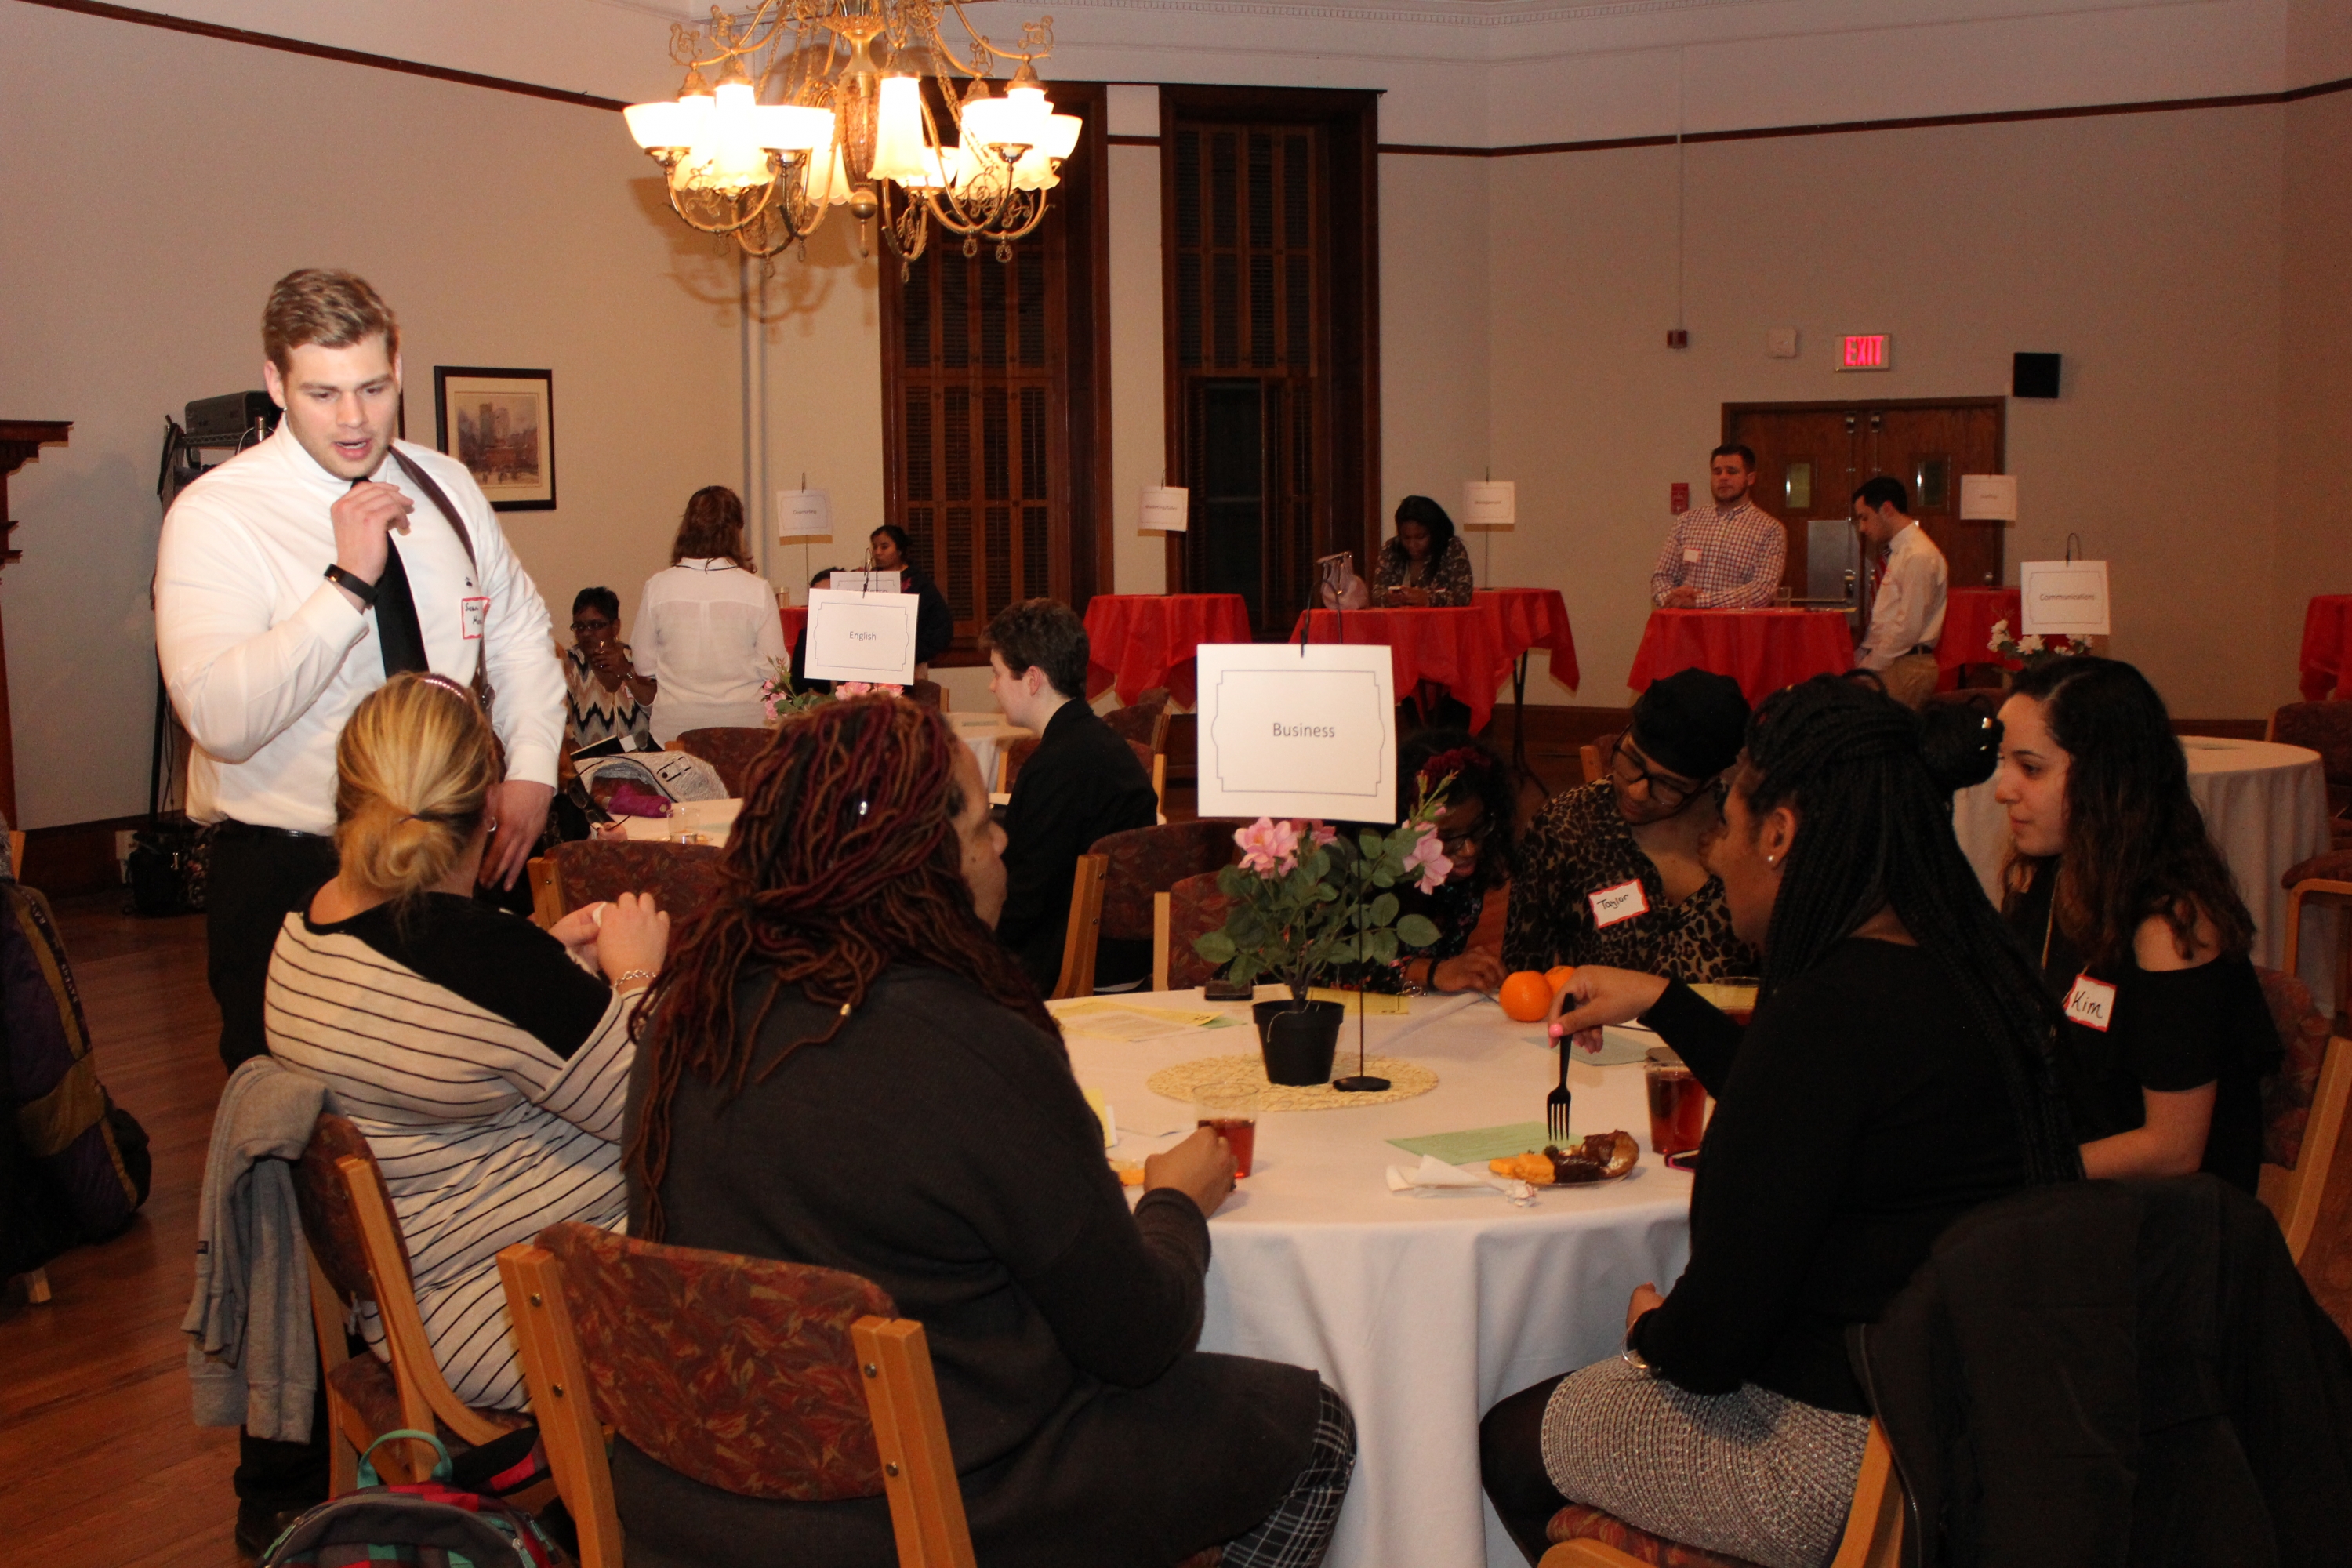 Students and alumni met in the East Parlor for some informal networking as part of the Backpack to Briefcase series.